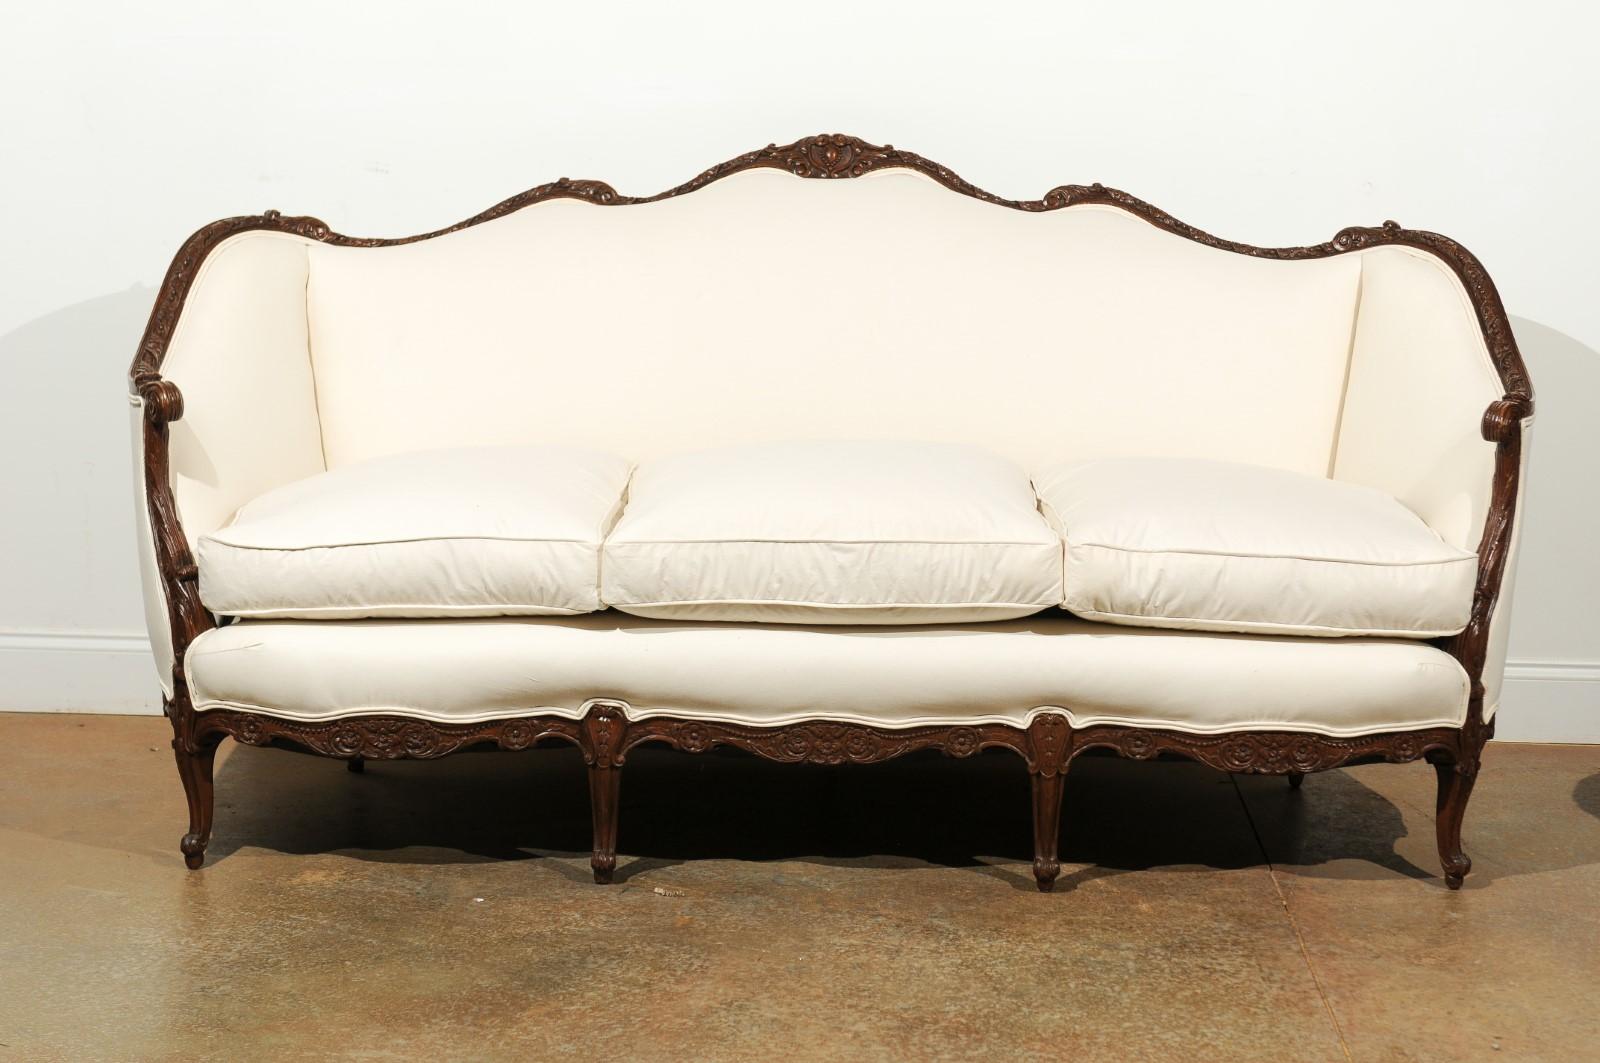 A French Louis XV style walnut three-seat sofa from the 19th century, with hand-carved crest and skirt, floral décor, scrolling arms, cabriole legs and new upholstery. This French sofa features a beautifully serpentine upper rail, adorned with